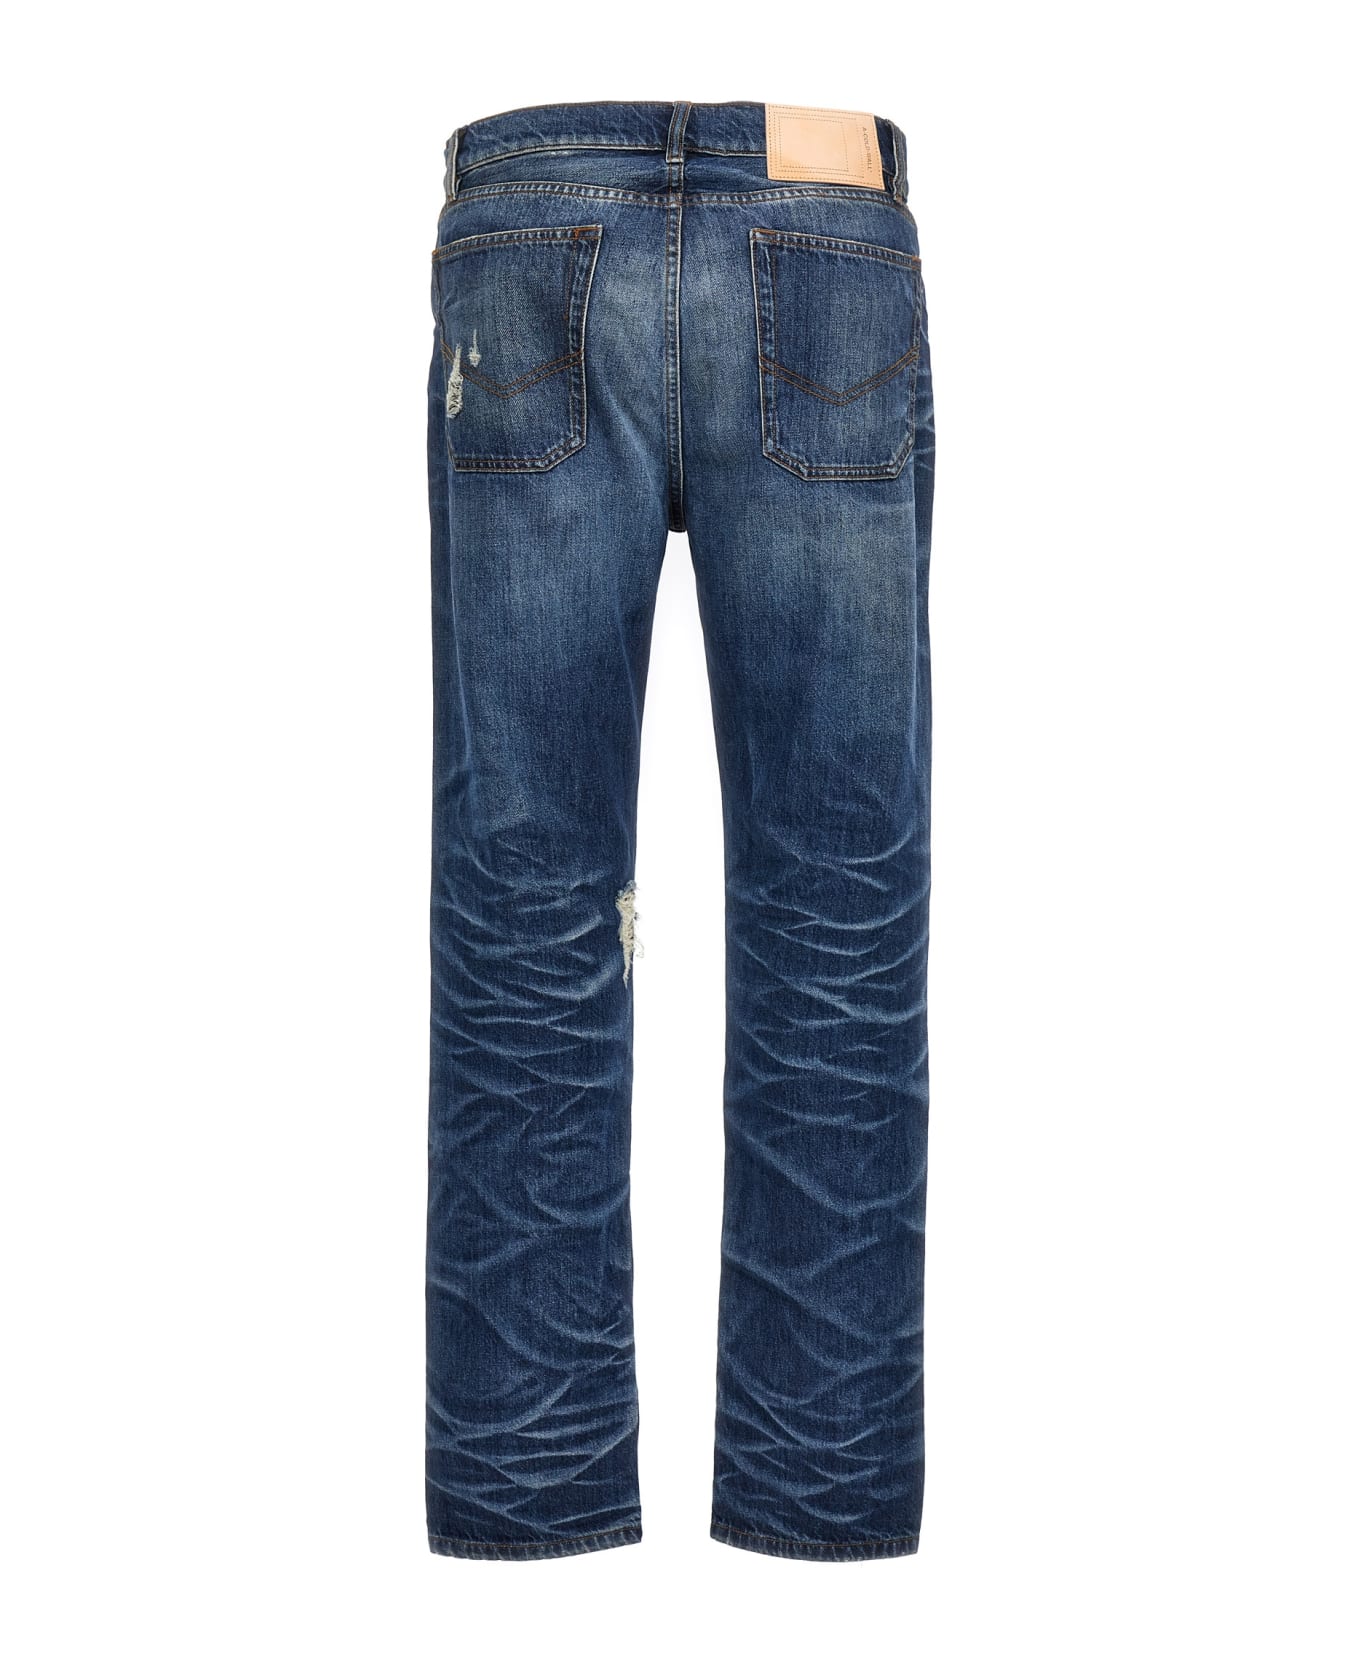 A-COLD-WALL 'foundry' Jeans - Blue